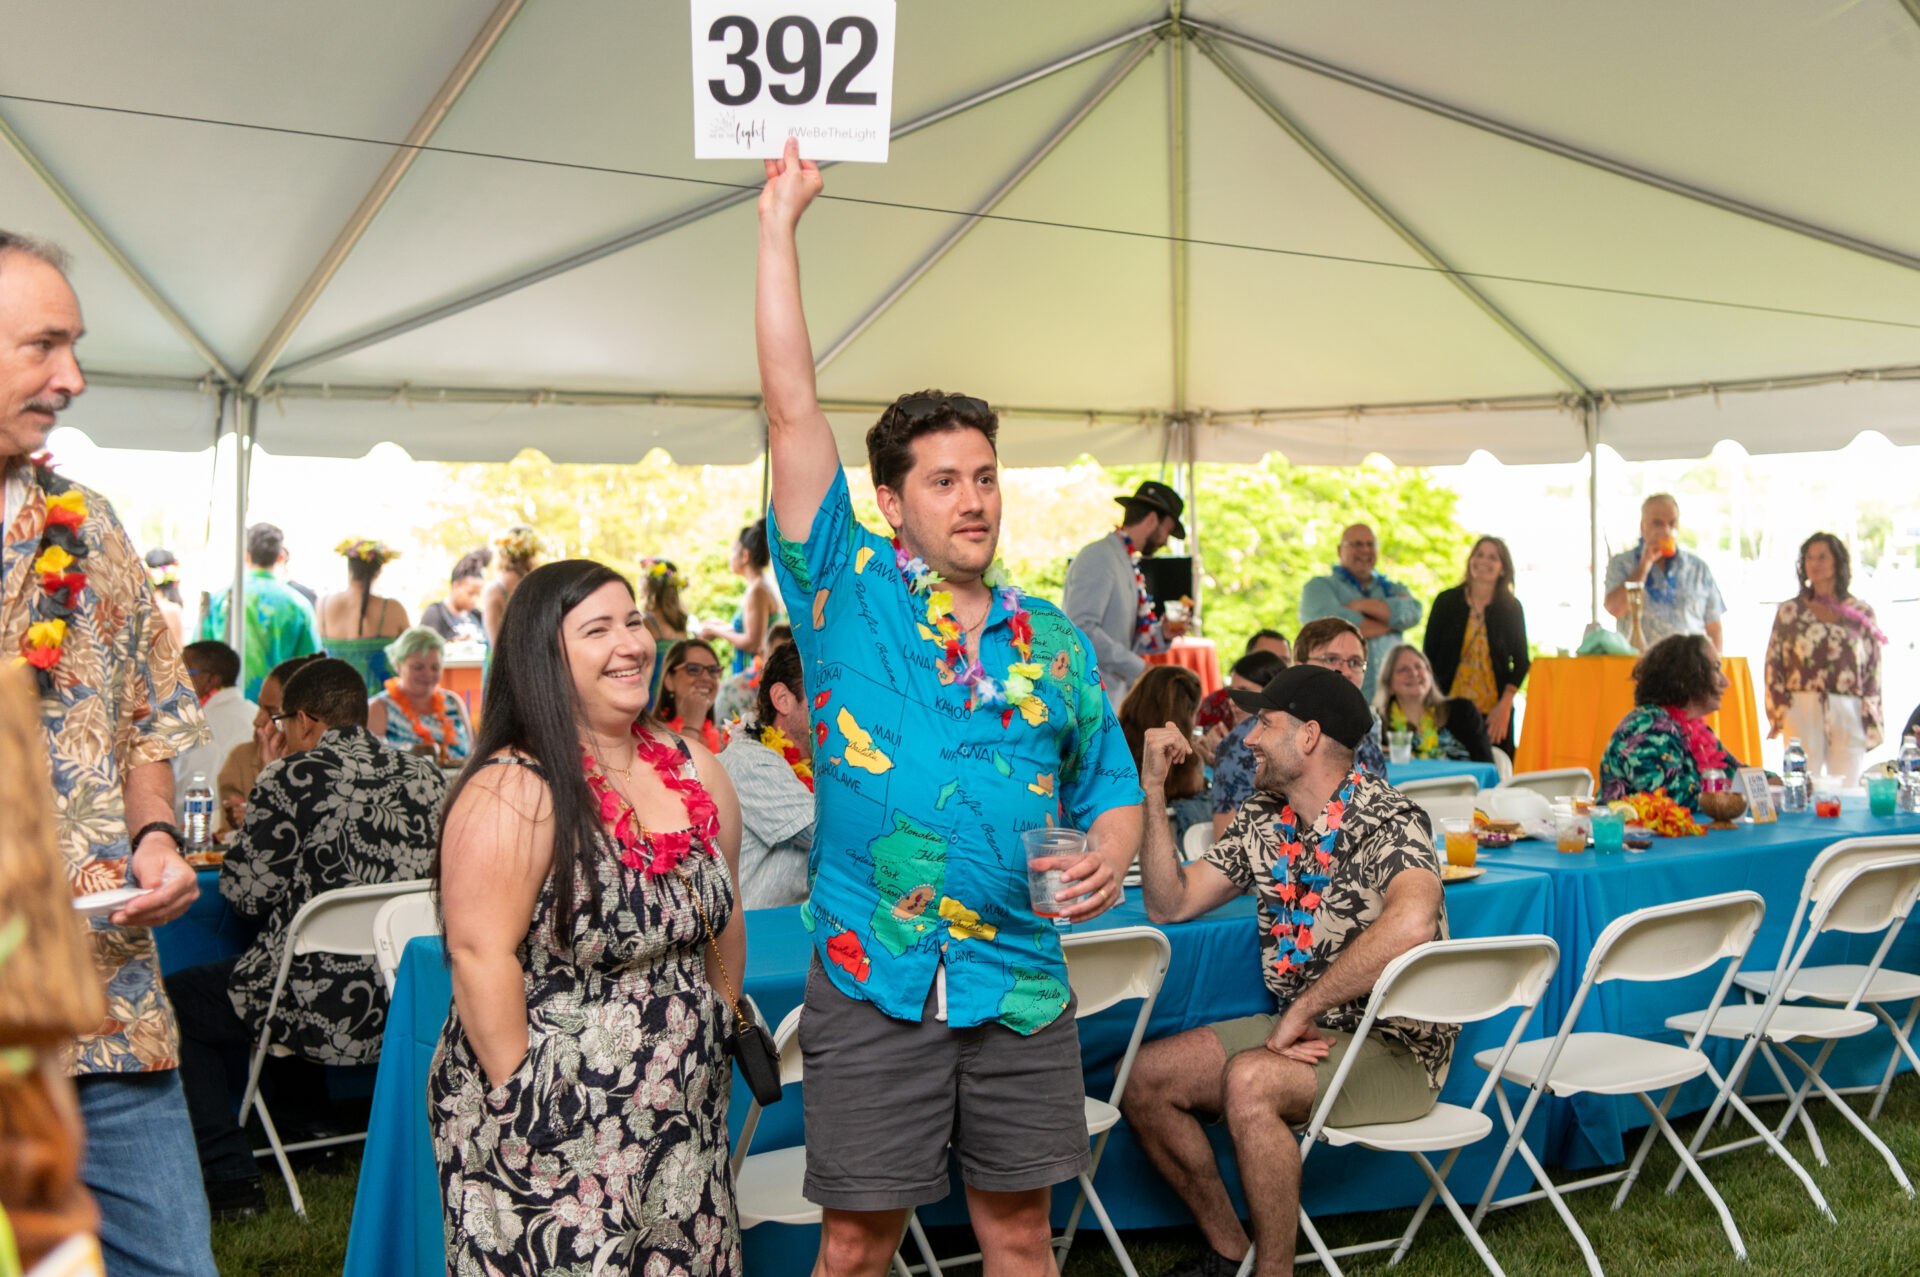 A man dressed in a blue hawaiian print shirt and dark grey shorts holds an auction card up with the number 392. There is a woman in a black and white floral dress standing to his right, with a number of people seated in the background behind him. 